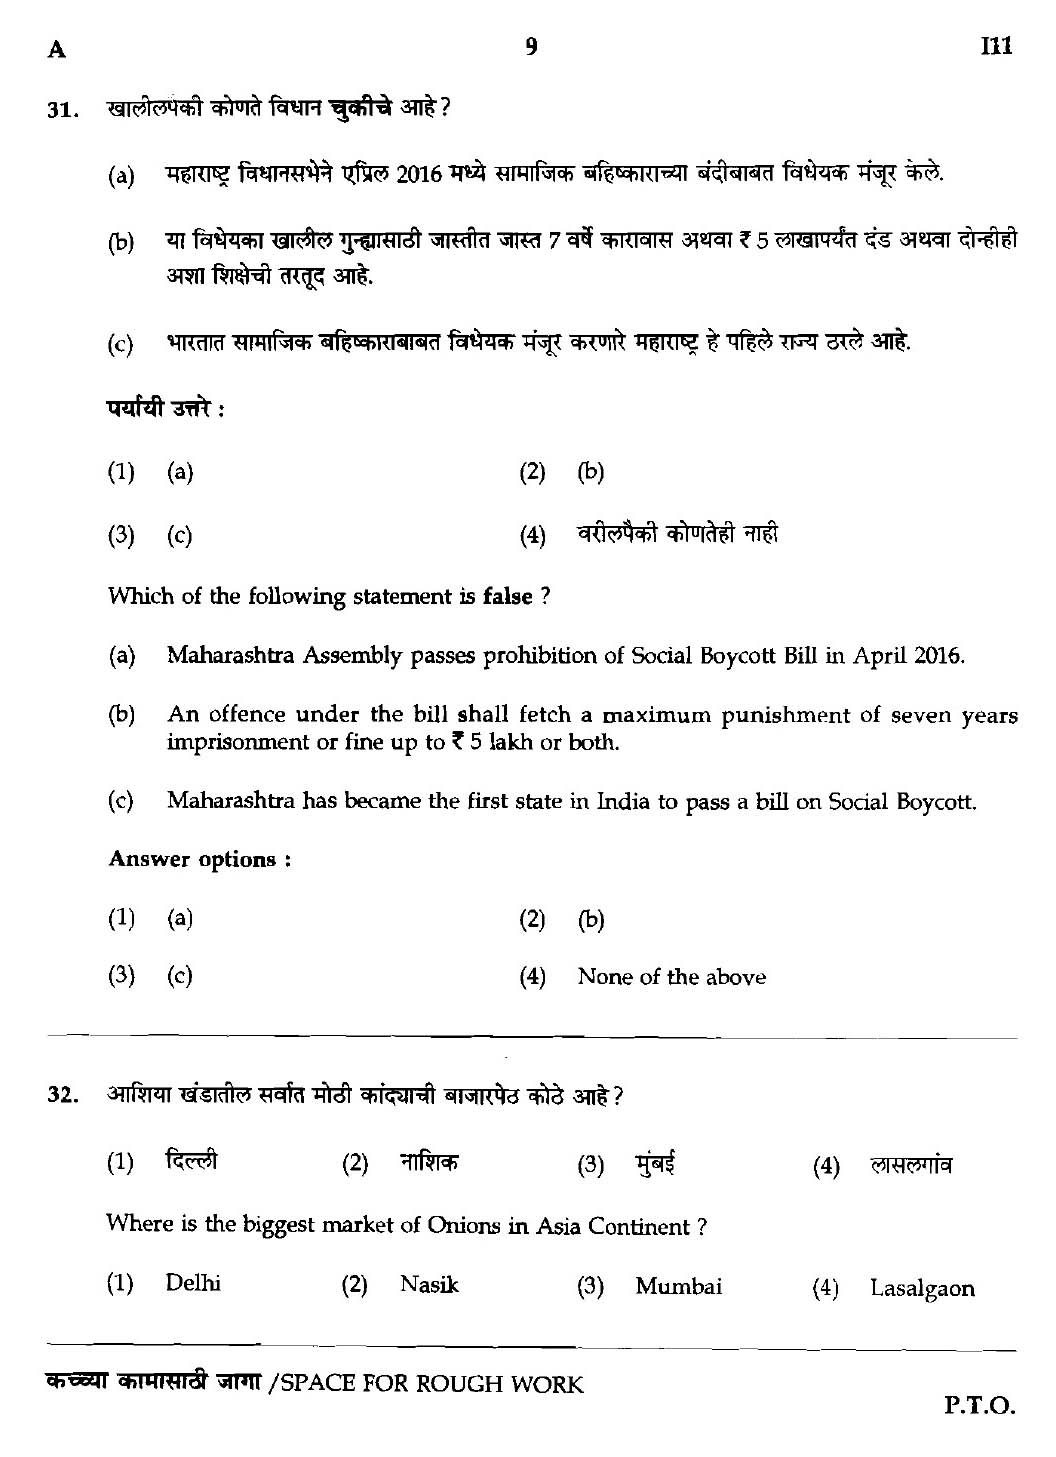 MPSC Agricultural Services Preliminary Exam 2018 Question Paper 8